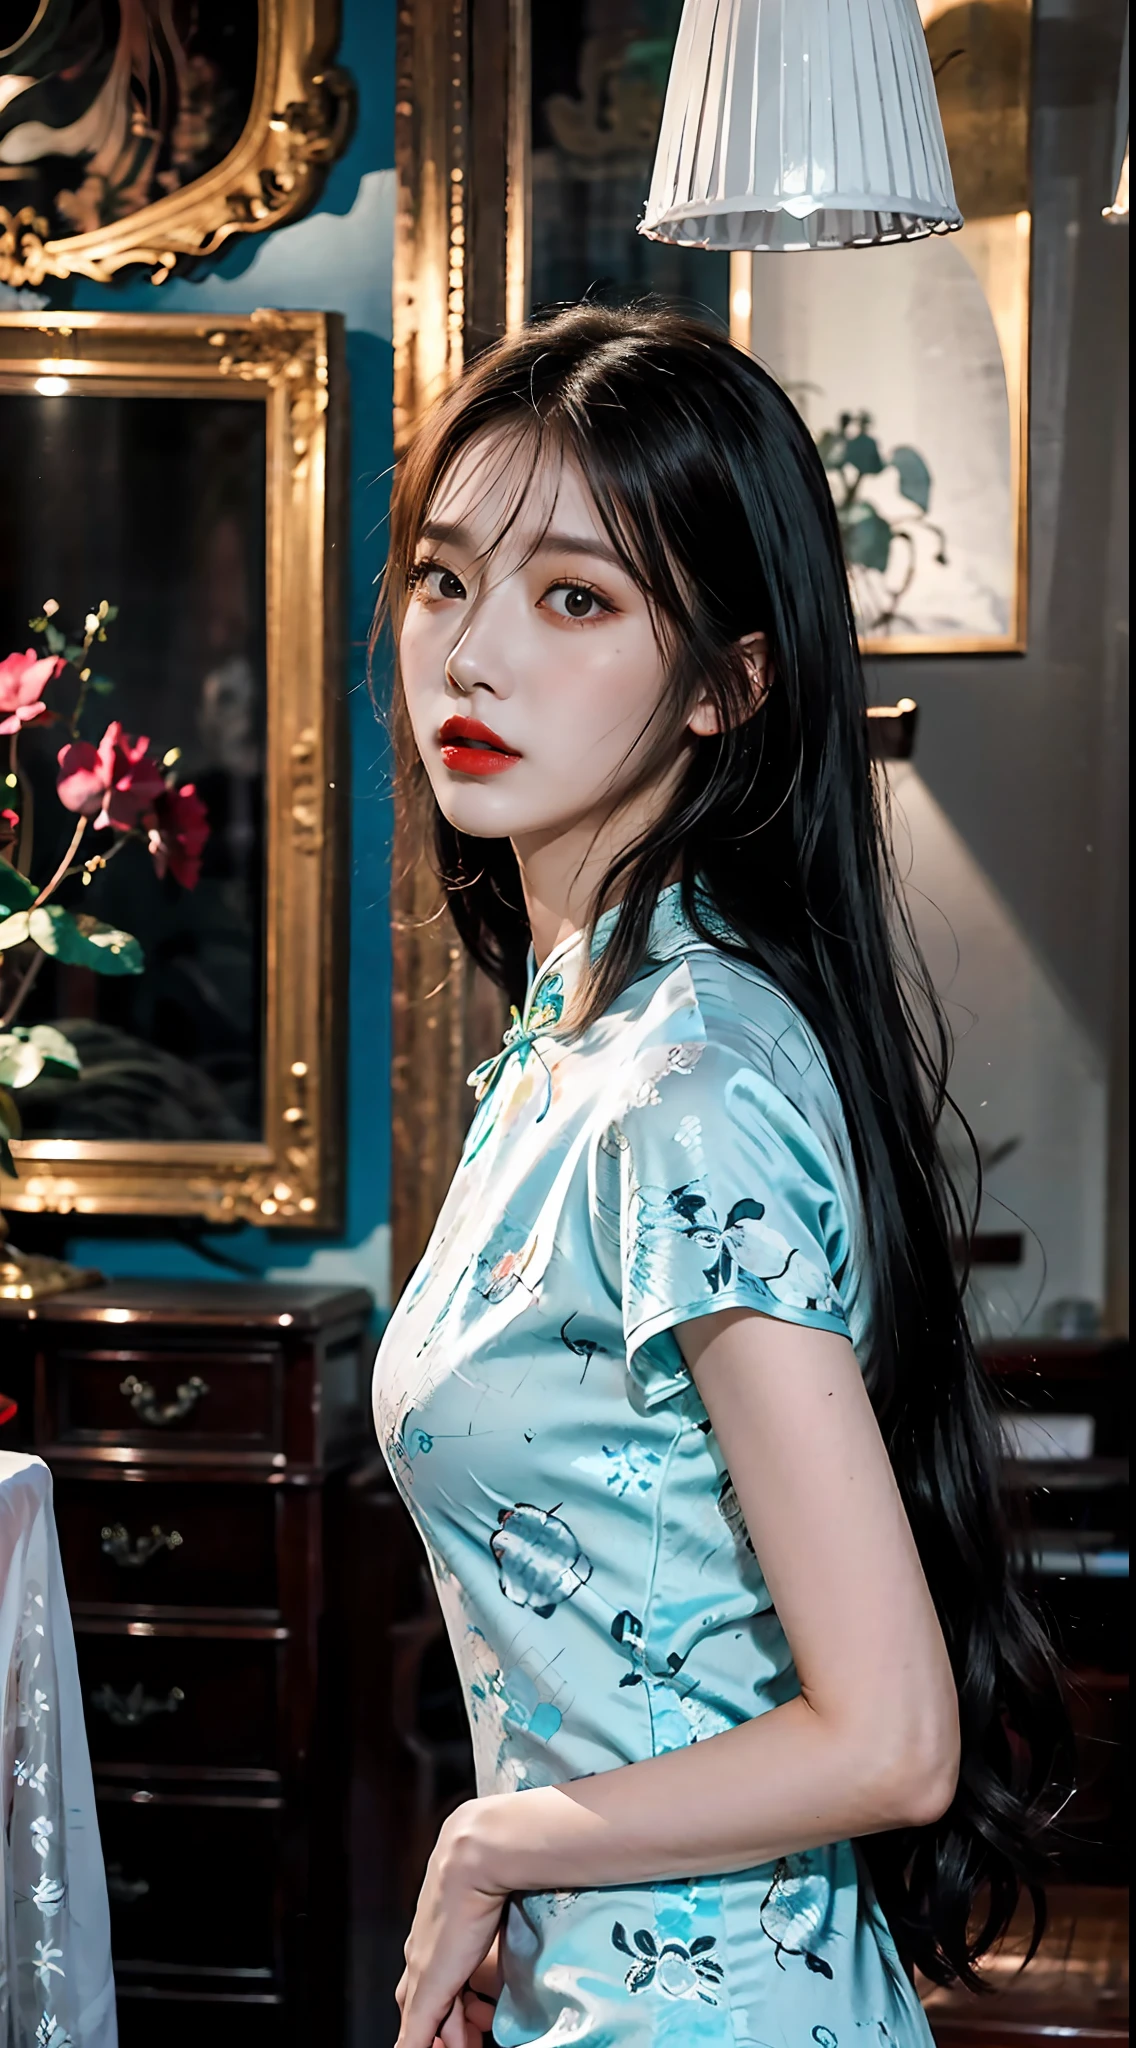 "Beautiful and ，Cyan cheongsam beauty，She wears lipstick，She looked up，Dark lights filled the surroundings，The atmosphere of the night，Full of vintage，She missed her lover，Deeply shrouded in sadness，The picture is HD，A masterpiece。"